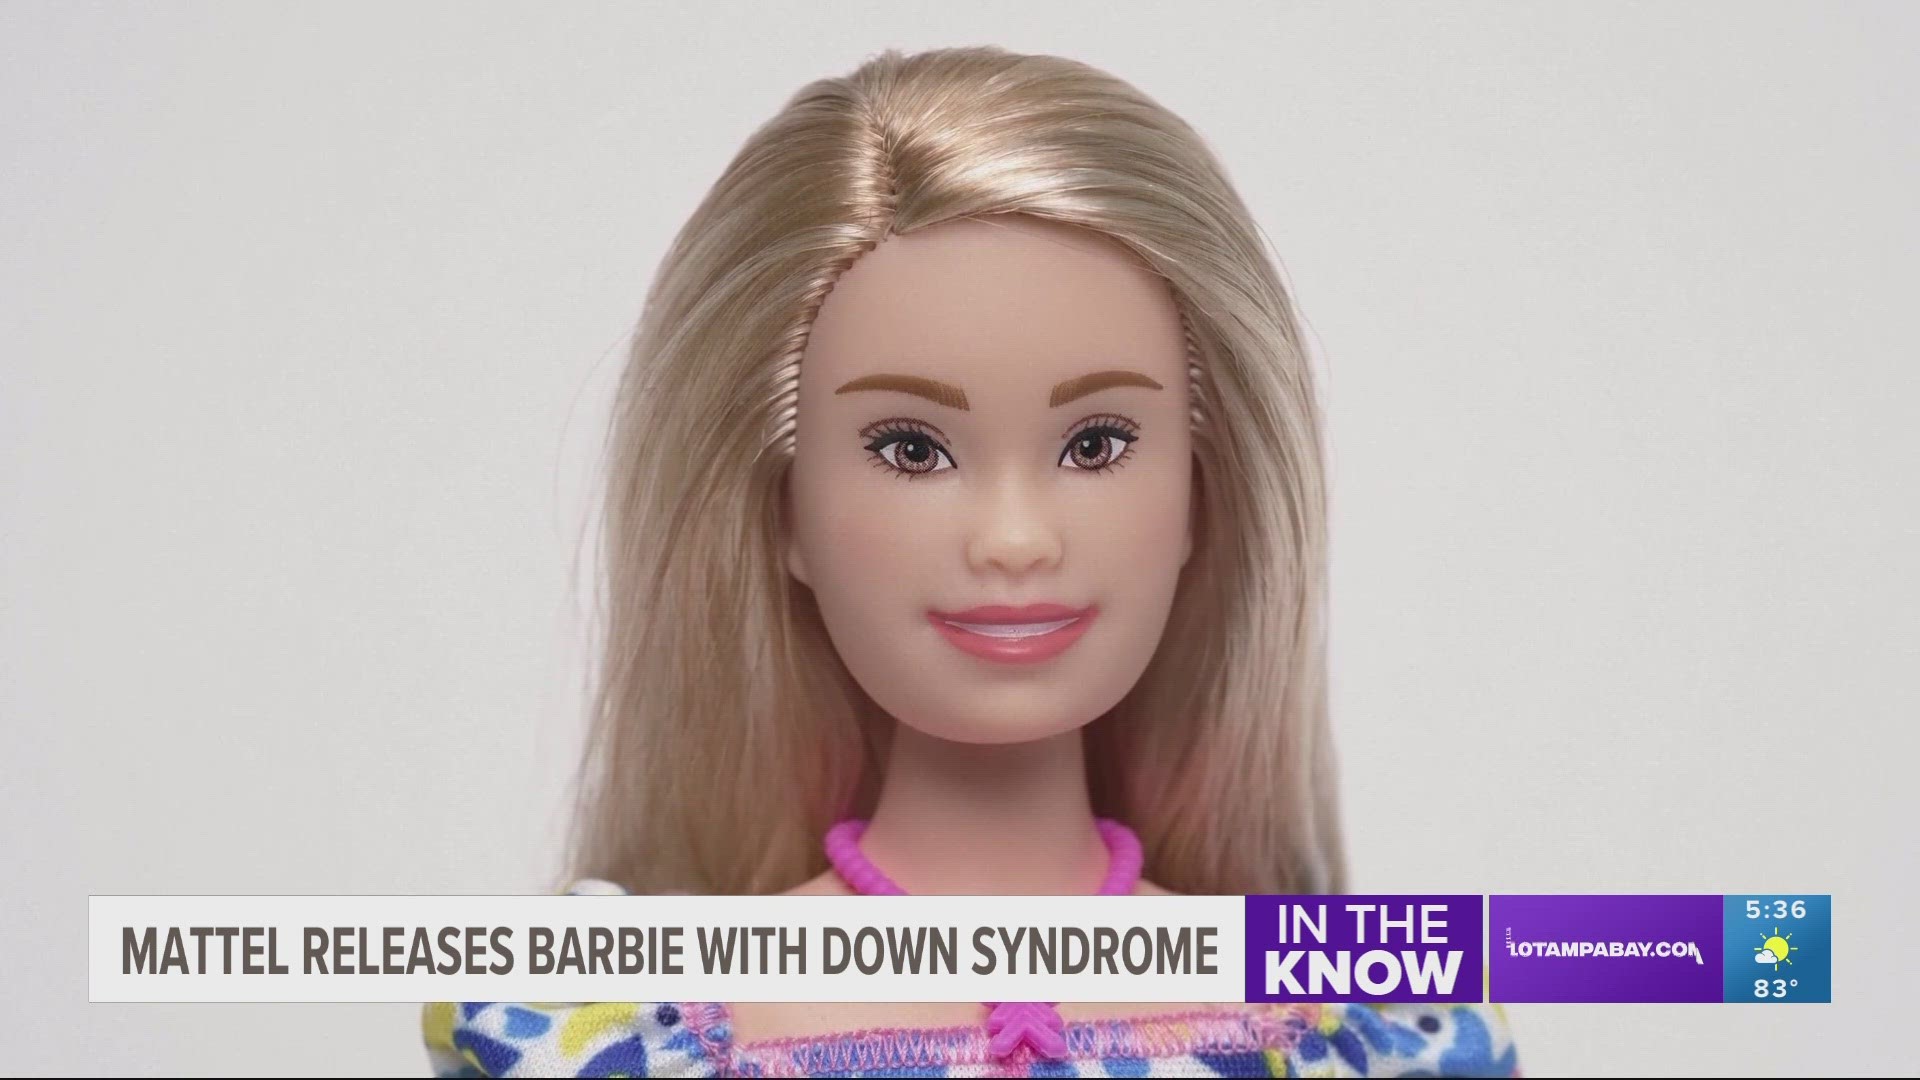 Mattel worked with the National Down Syndrome Society to design a new face, body and outfit for the doll.